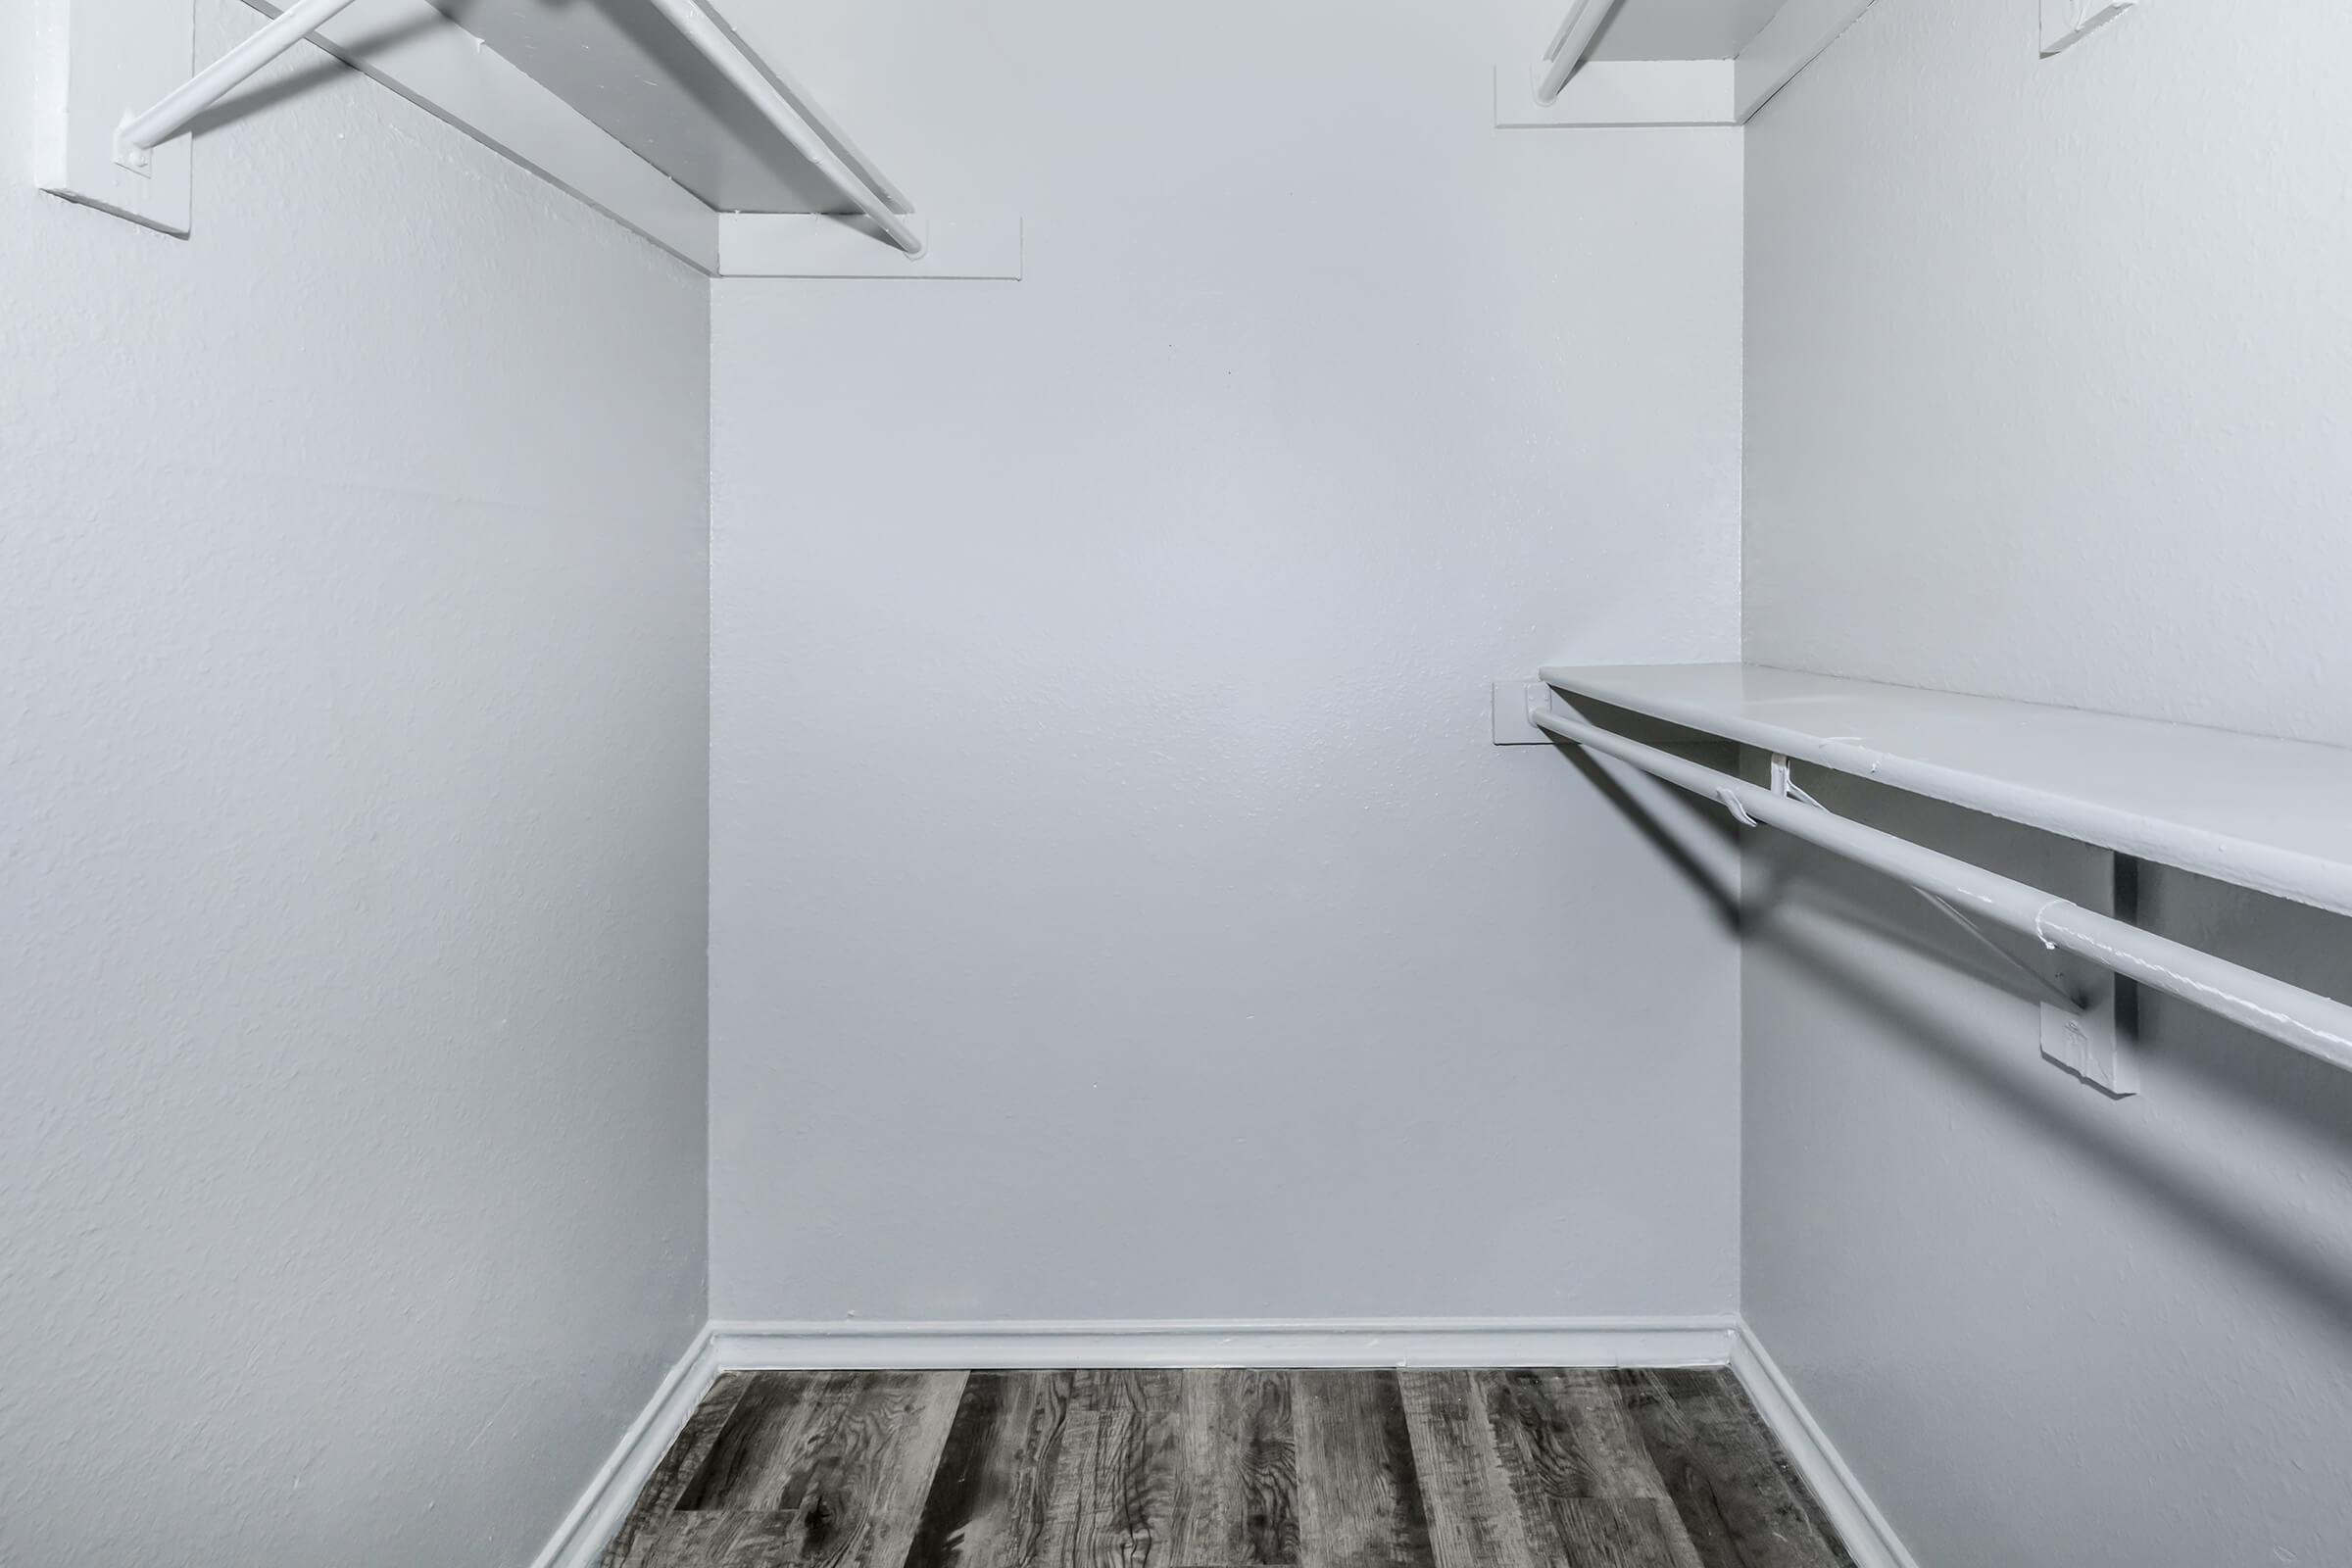 TEXAS-SIZED WALK-IN CLOSETS